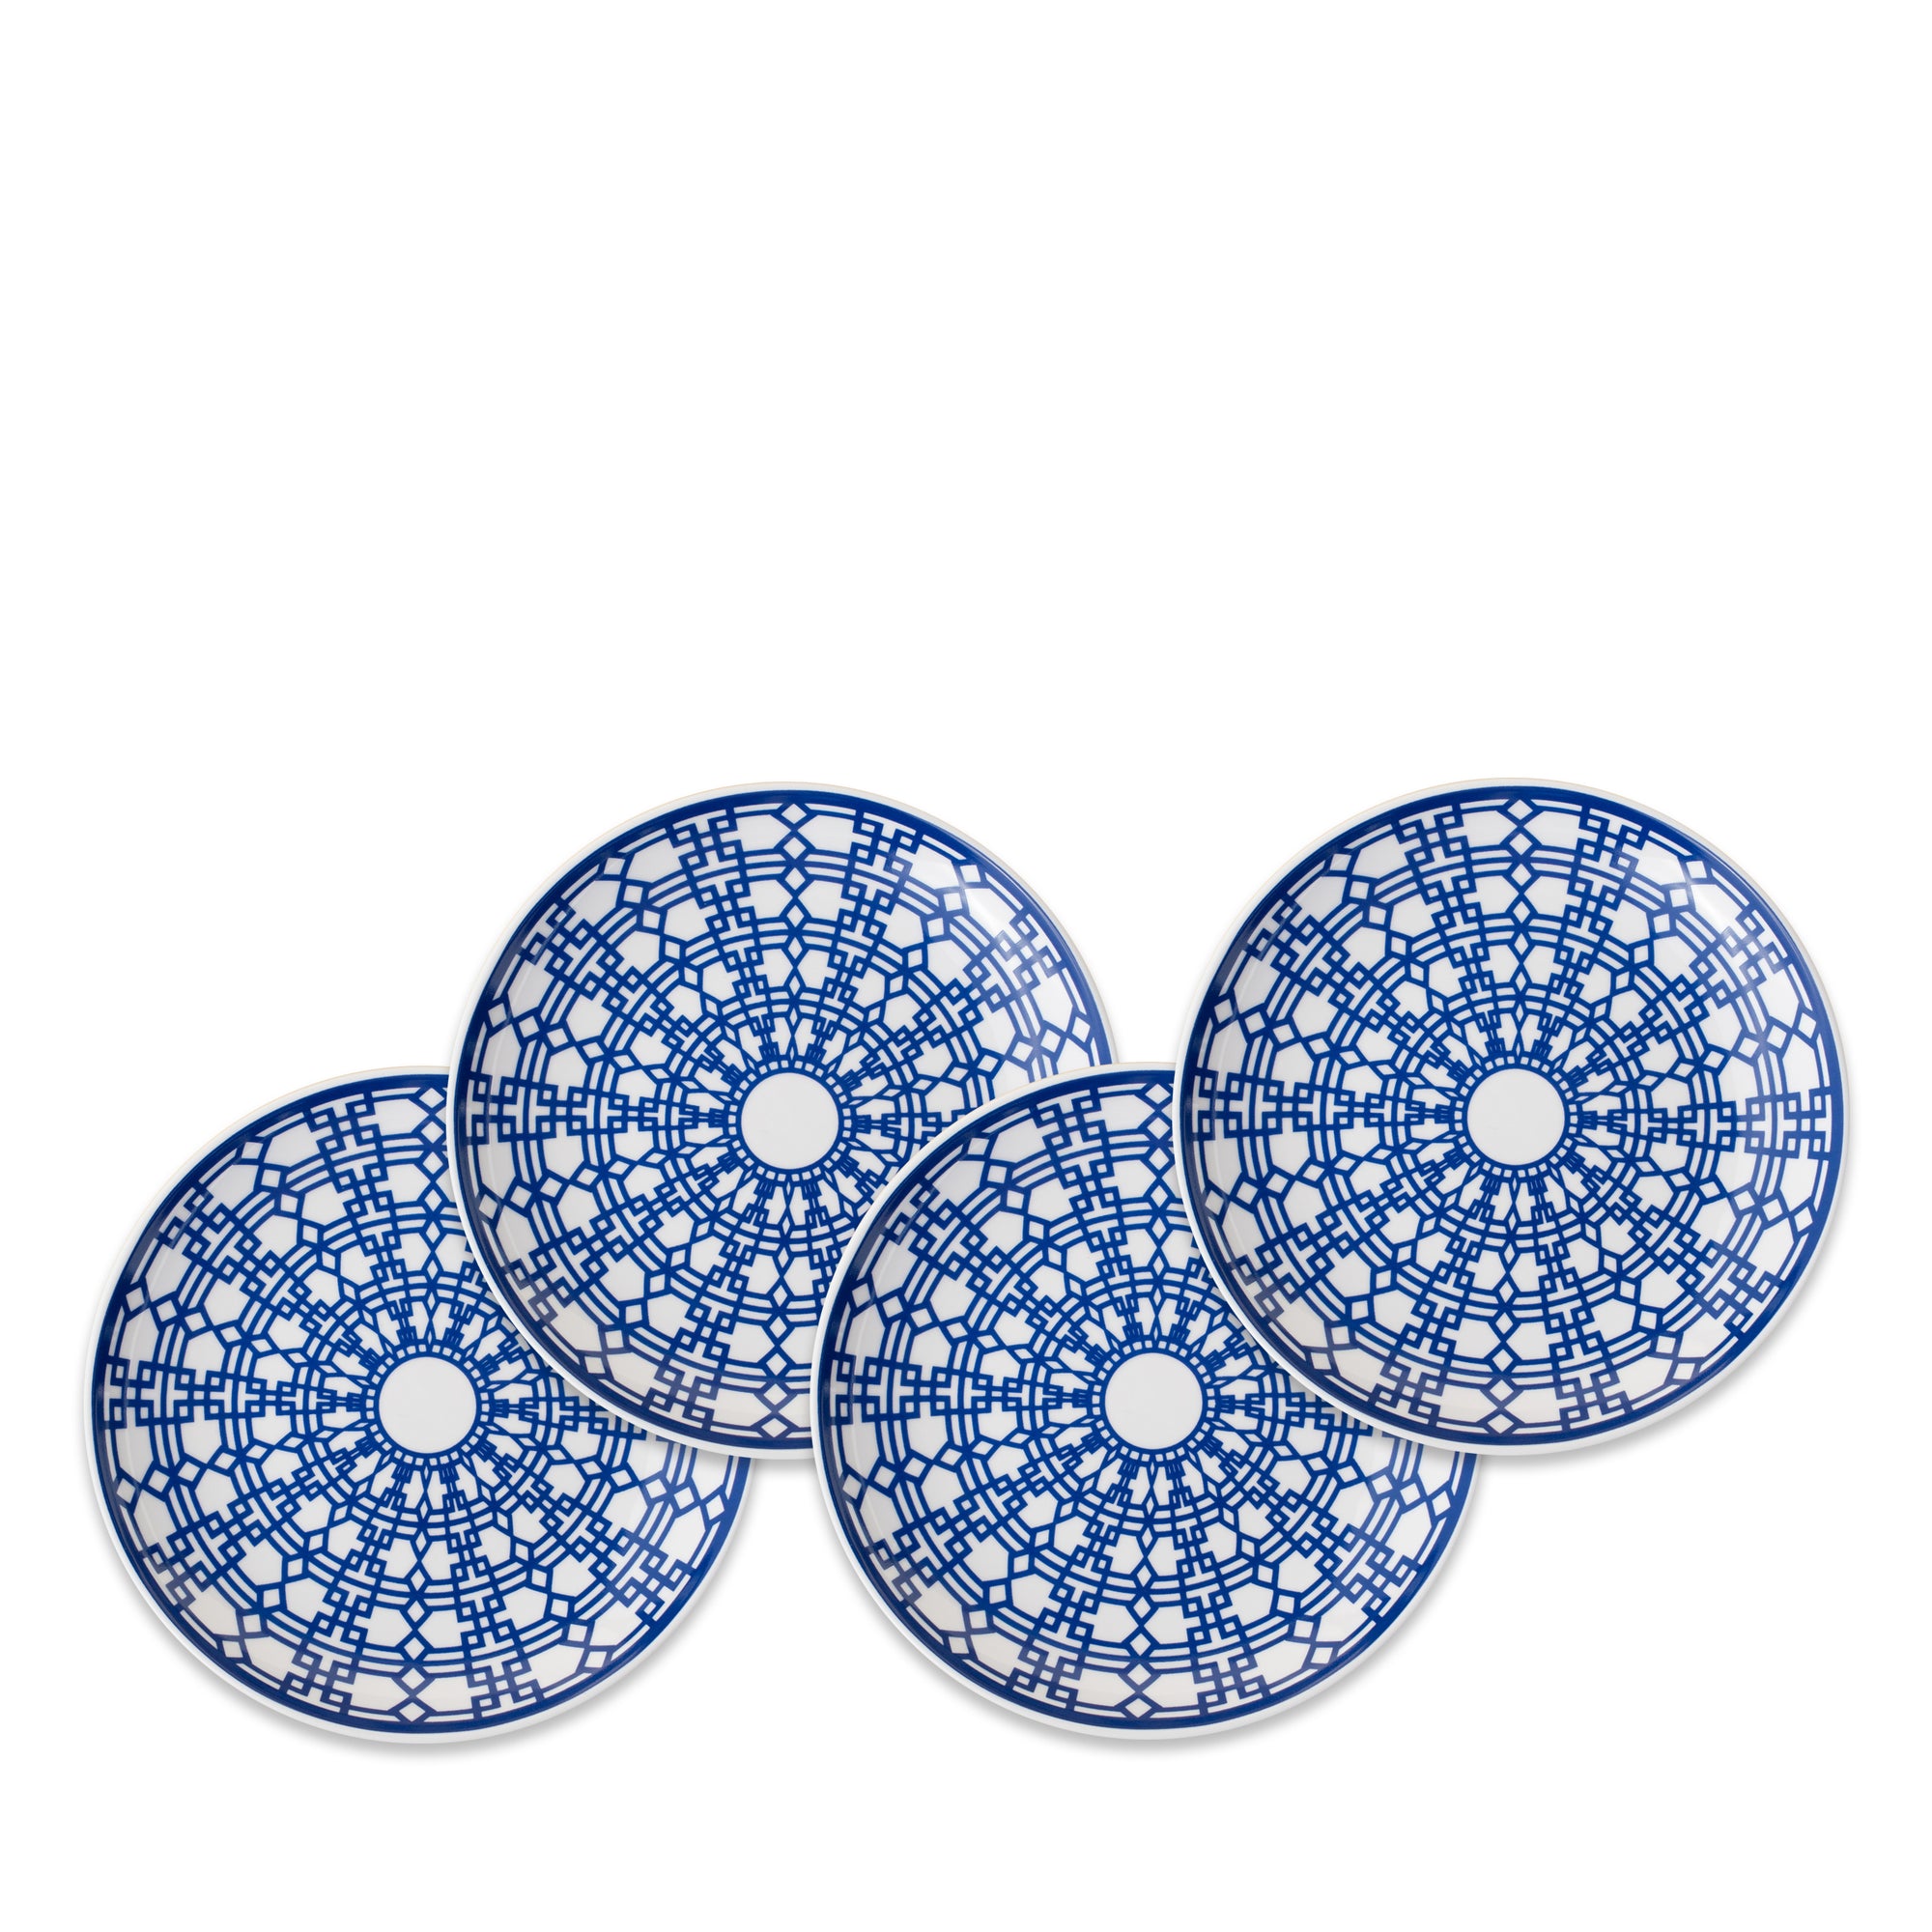 Four blue and white ceramic plates with intricate, interlocking lattice patterns, arranged overlapping each other in a fan shape. Perfect for any setting, these Newport Small Plates by Caskata Artisanal Home are crafted from premium porcelain inspired by the Newport Garden Gate design.